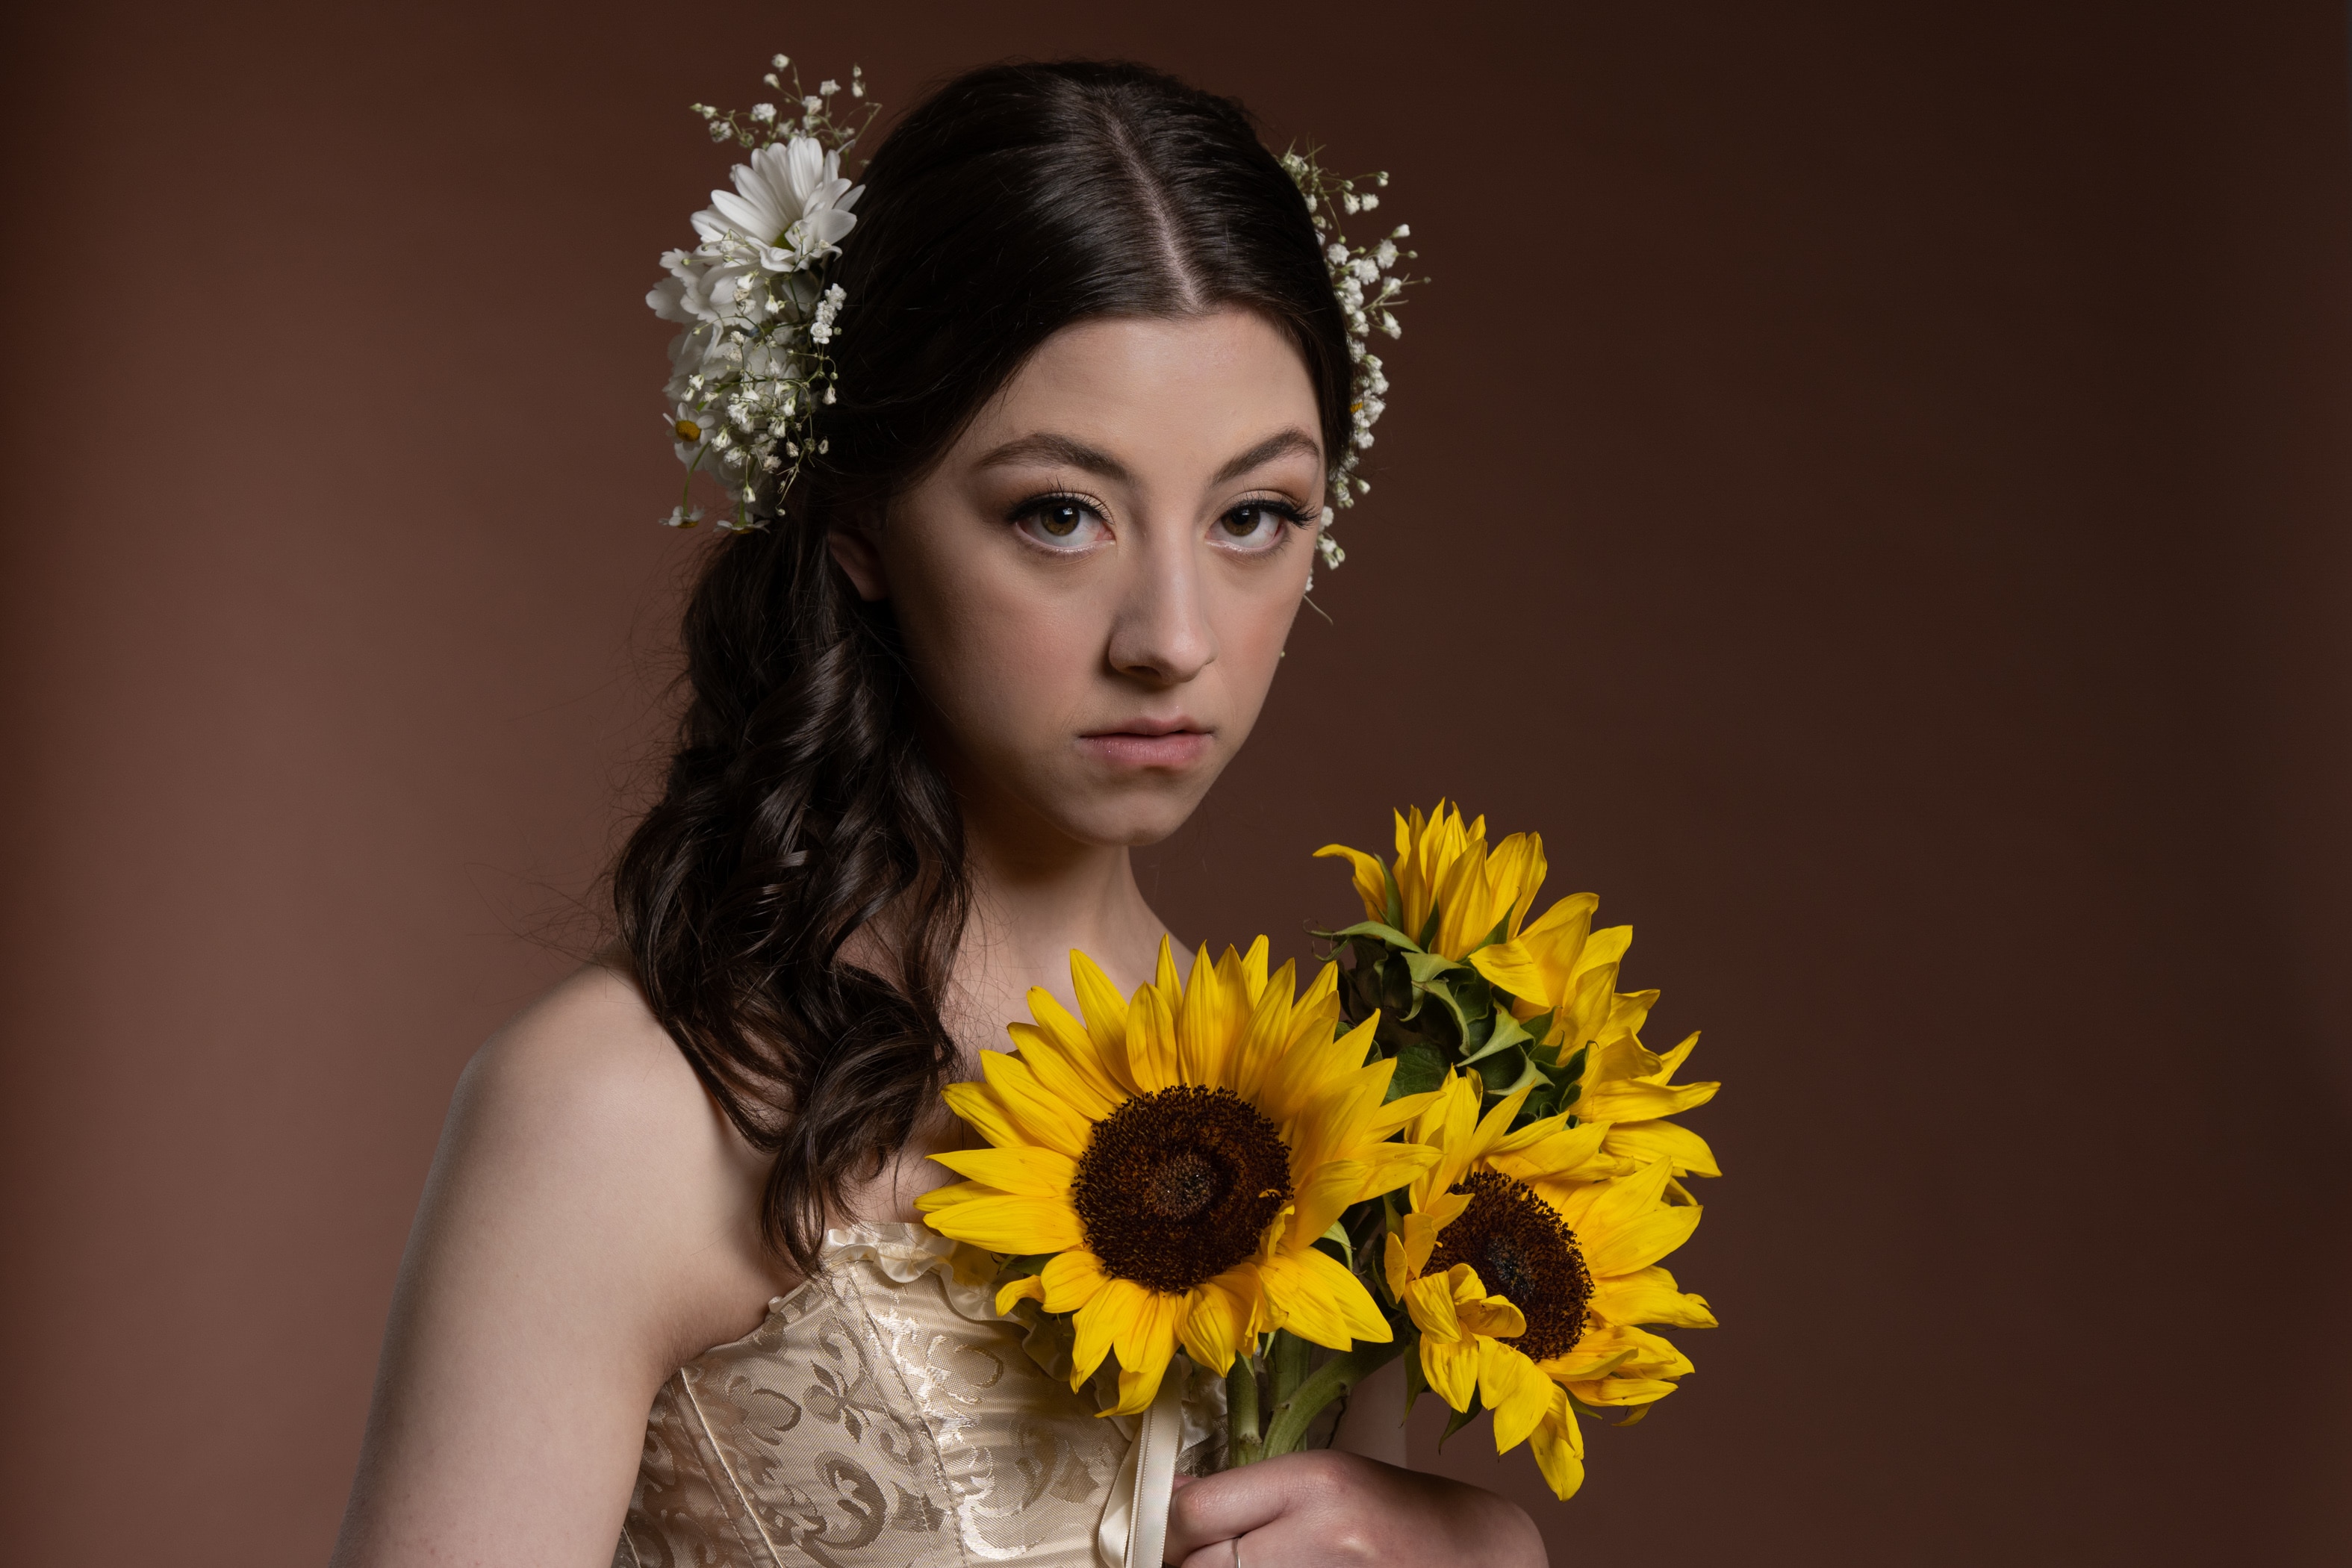 Young lady holding daisies with flowers in her long dark hair wearing a shoulder less white dress.